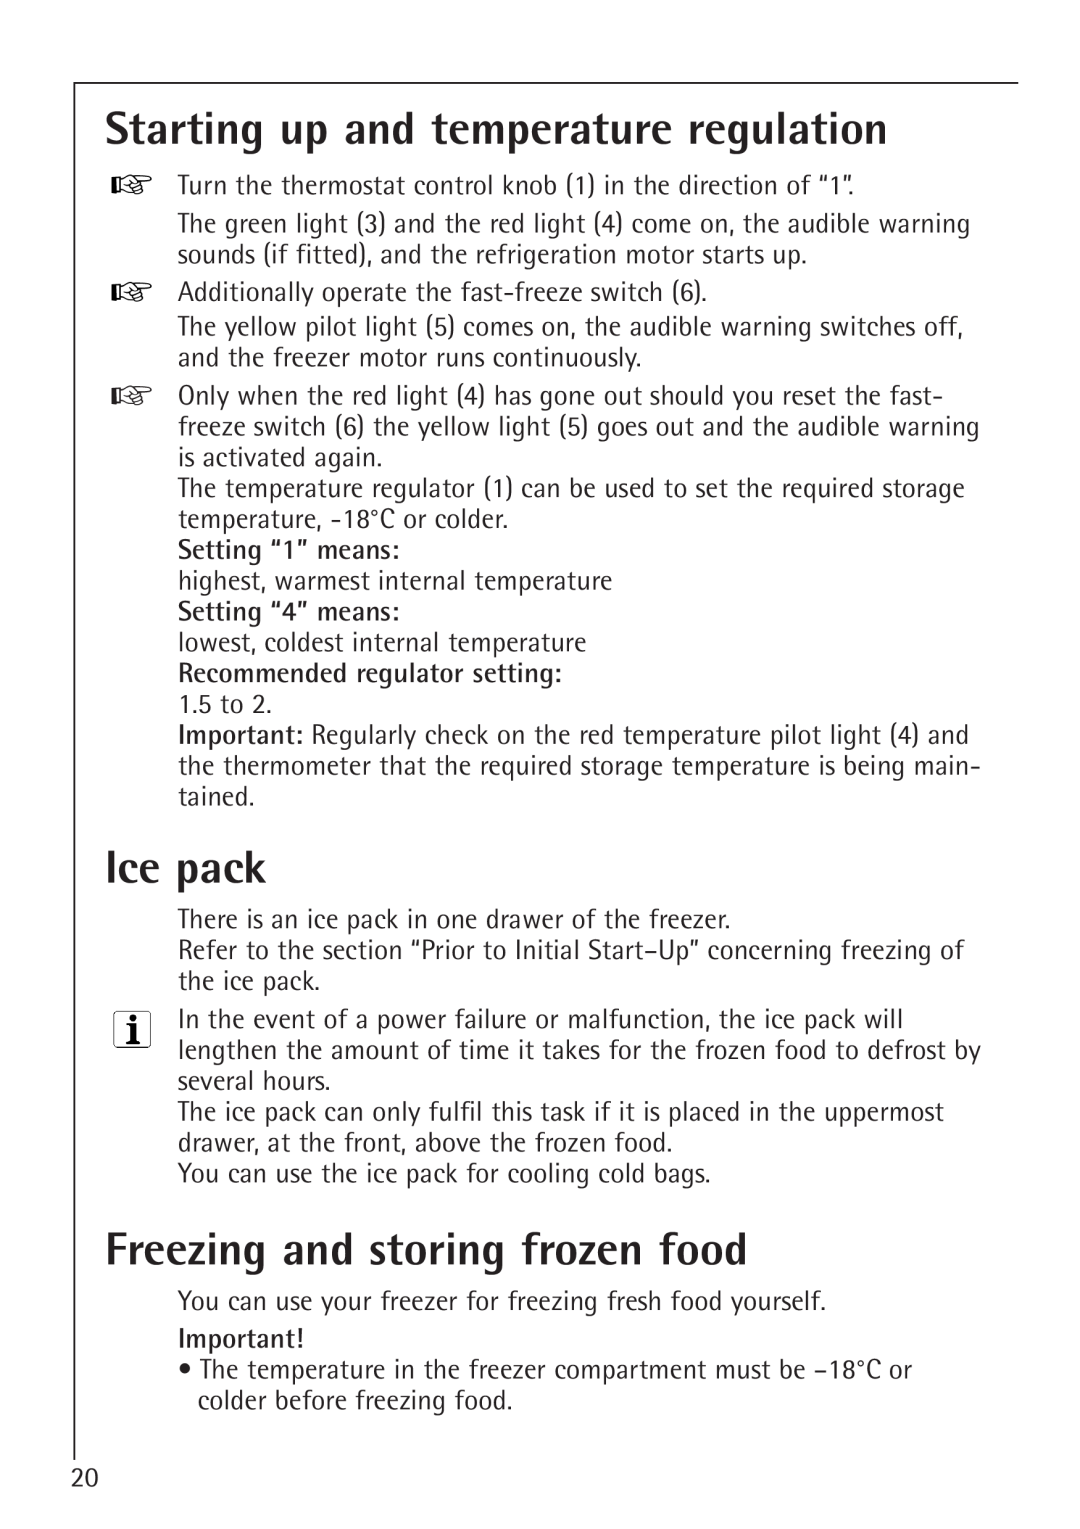 Electrolux 66050i Starting up and temperature regulation, Ice pack, Freezing and storing frozen food, Setting “1” means 